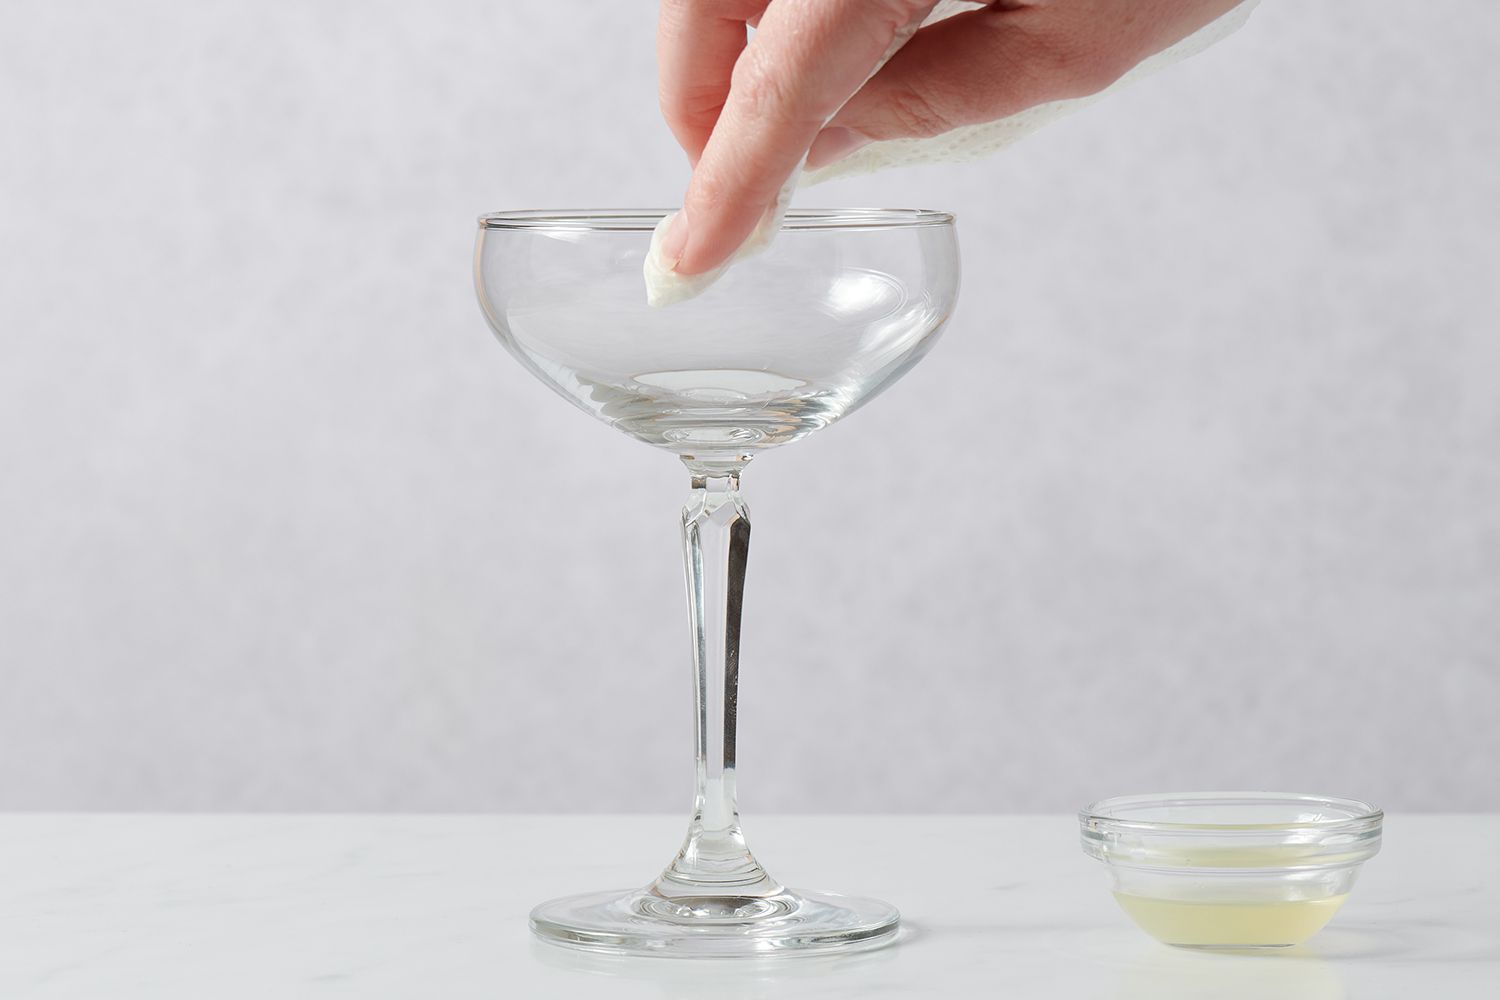 Rubbing the rim of a cocktail glass with lemon juice